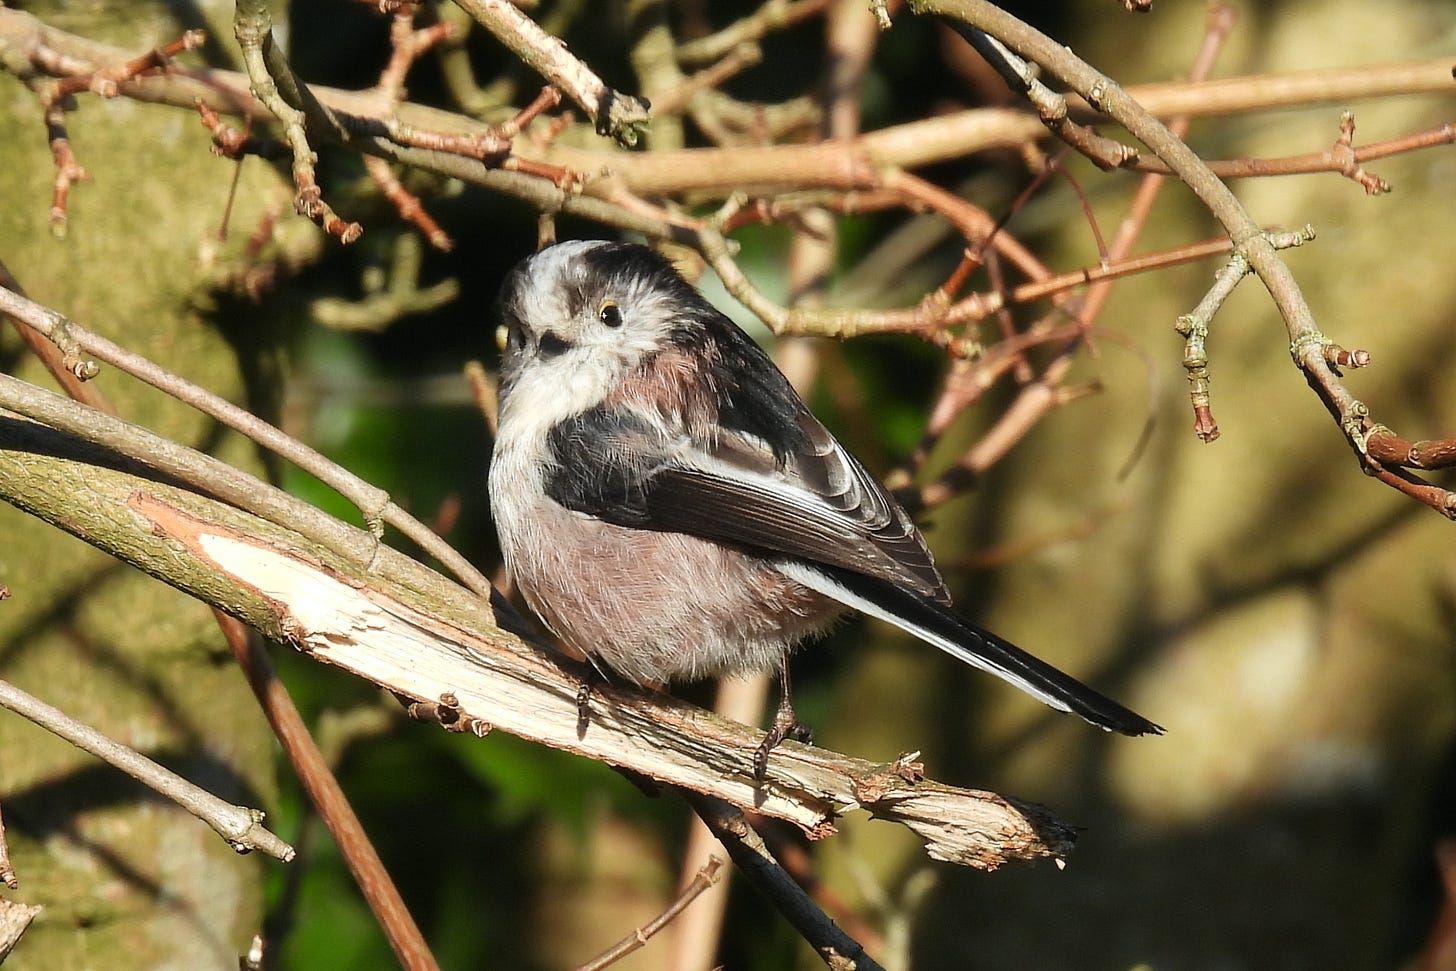 Close up of a Long-tailed Tit sitting on a branch with blurred twigs in the background. Bird has back mostly towards the camera but is looking over its left shoulder towards us. 